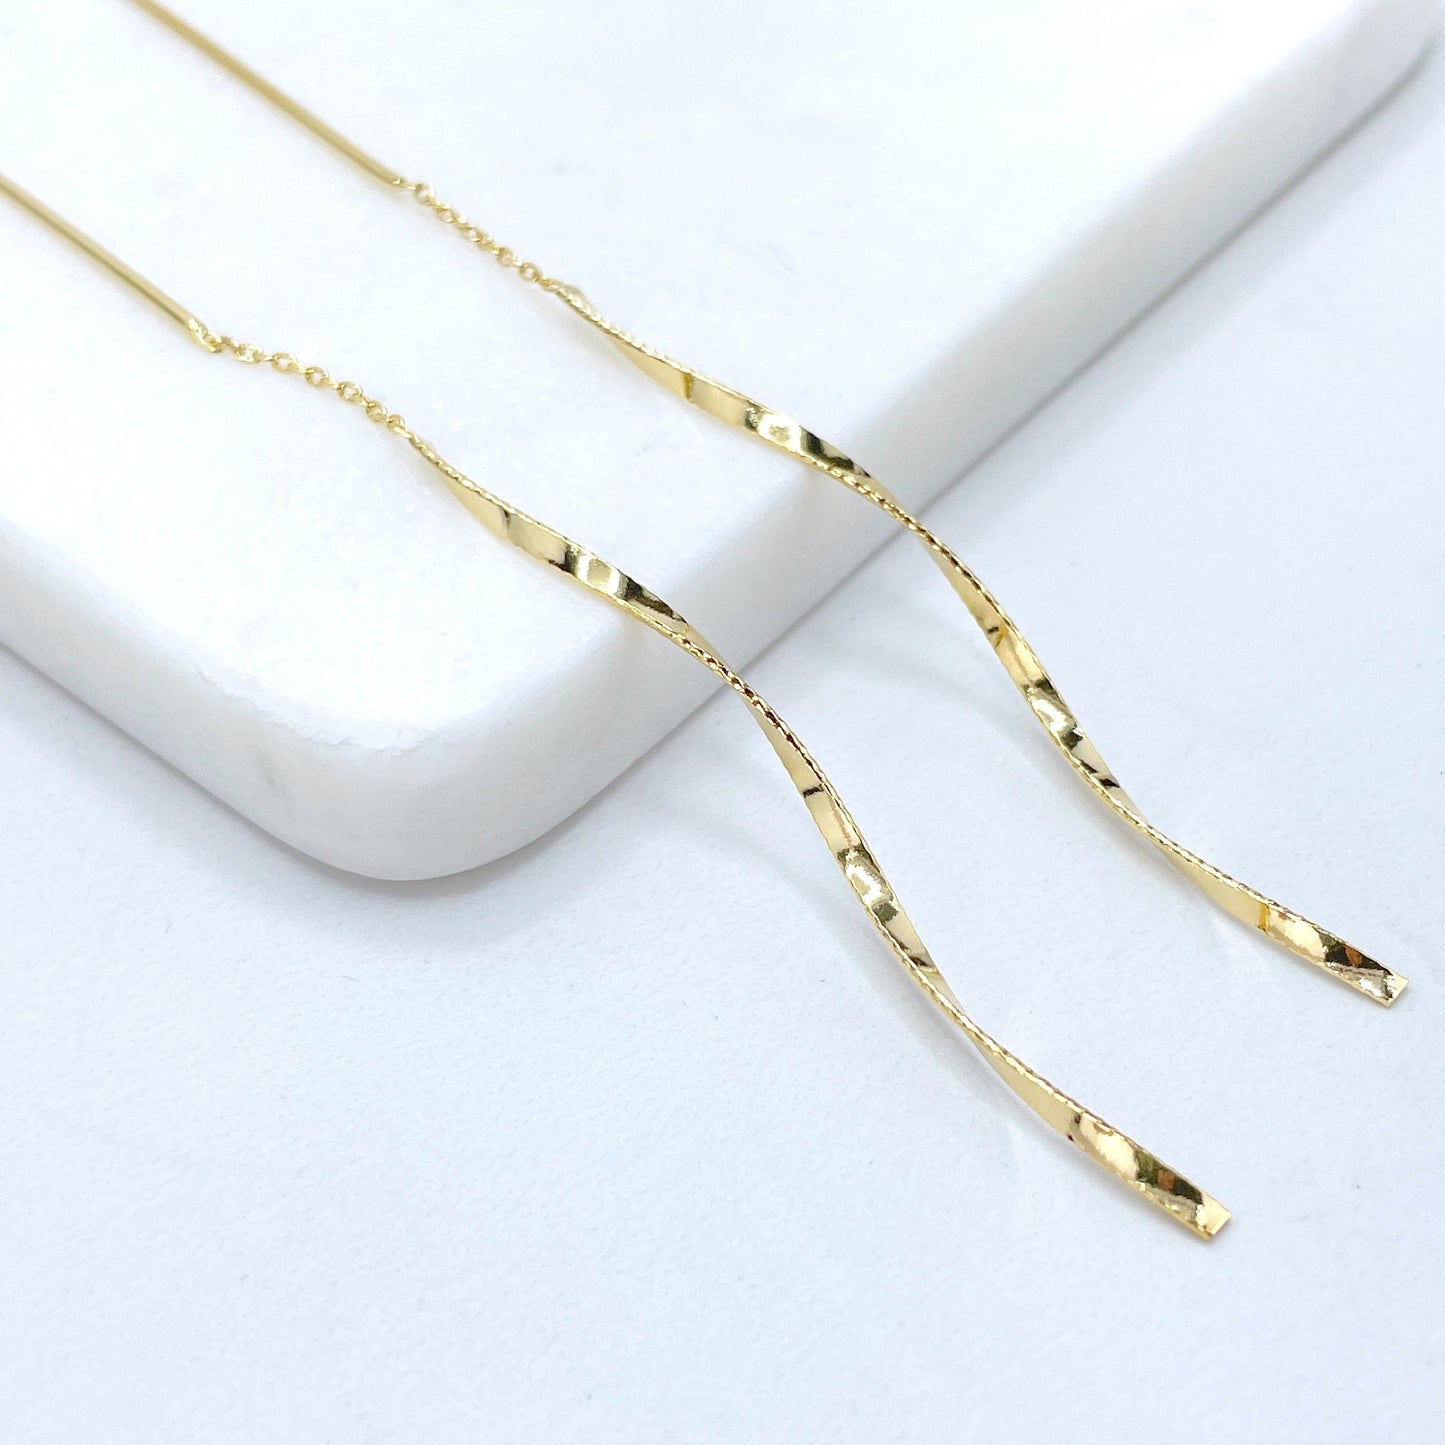 18k Gold Filled Twisted Waves, Threader Drop Earrings, Wholesale Jewelry Making Supplies